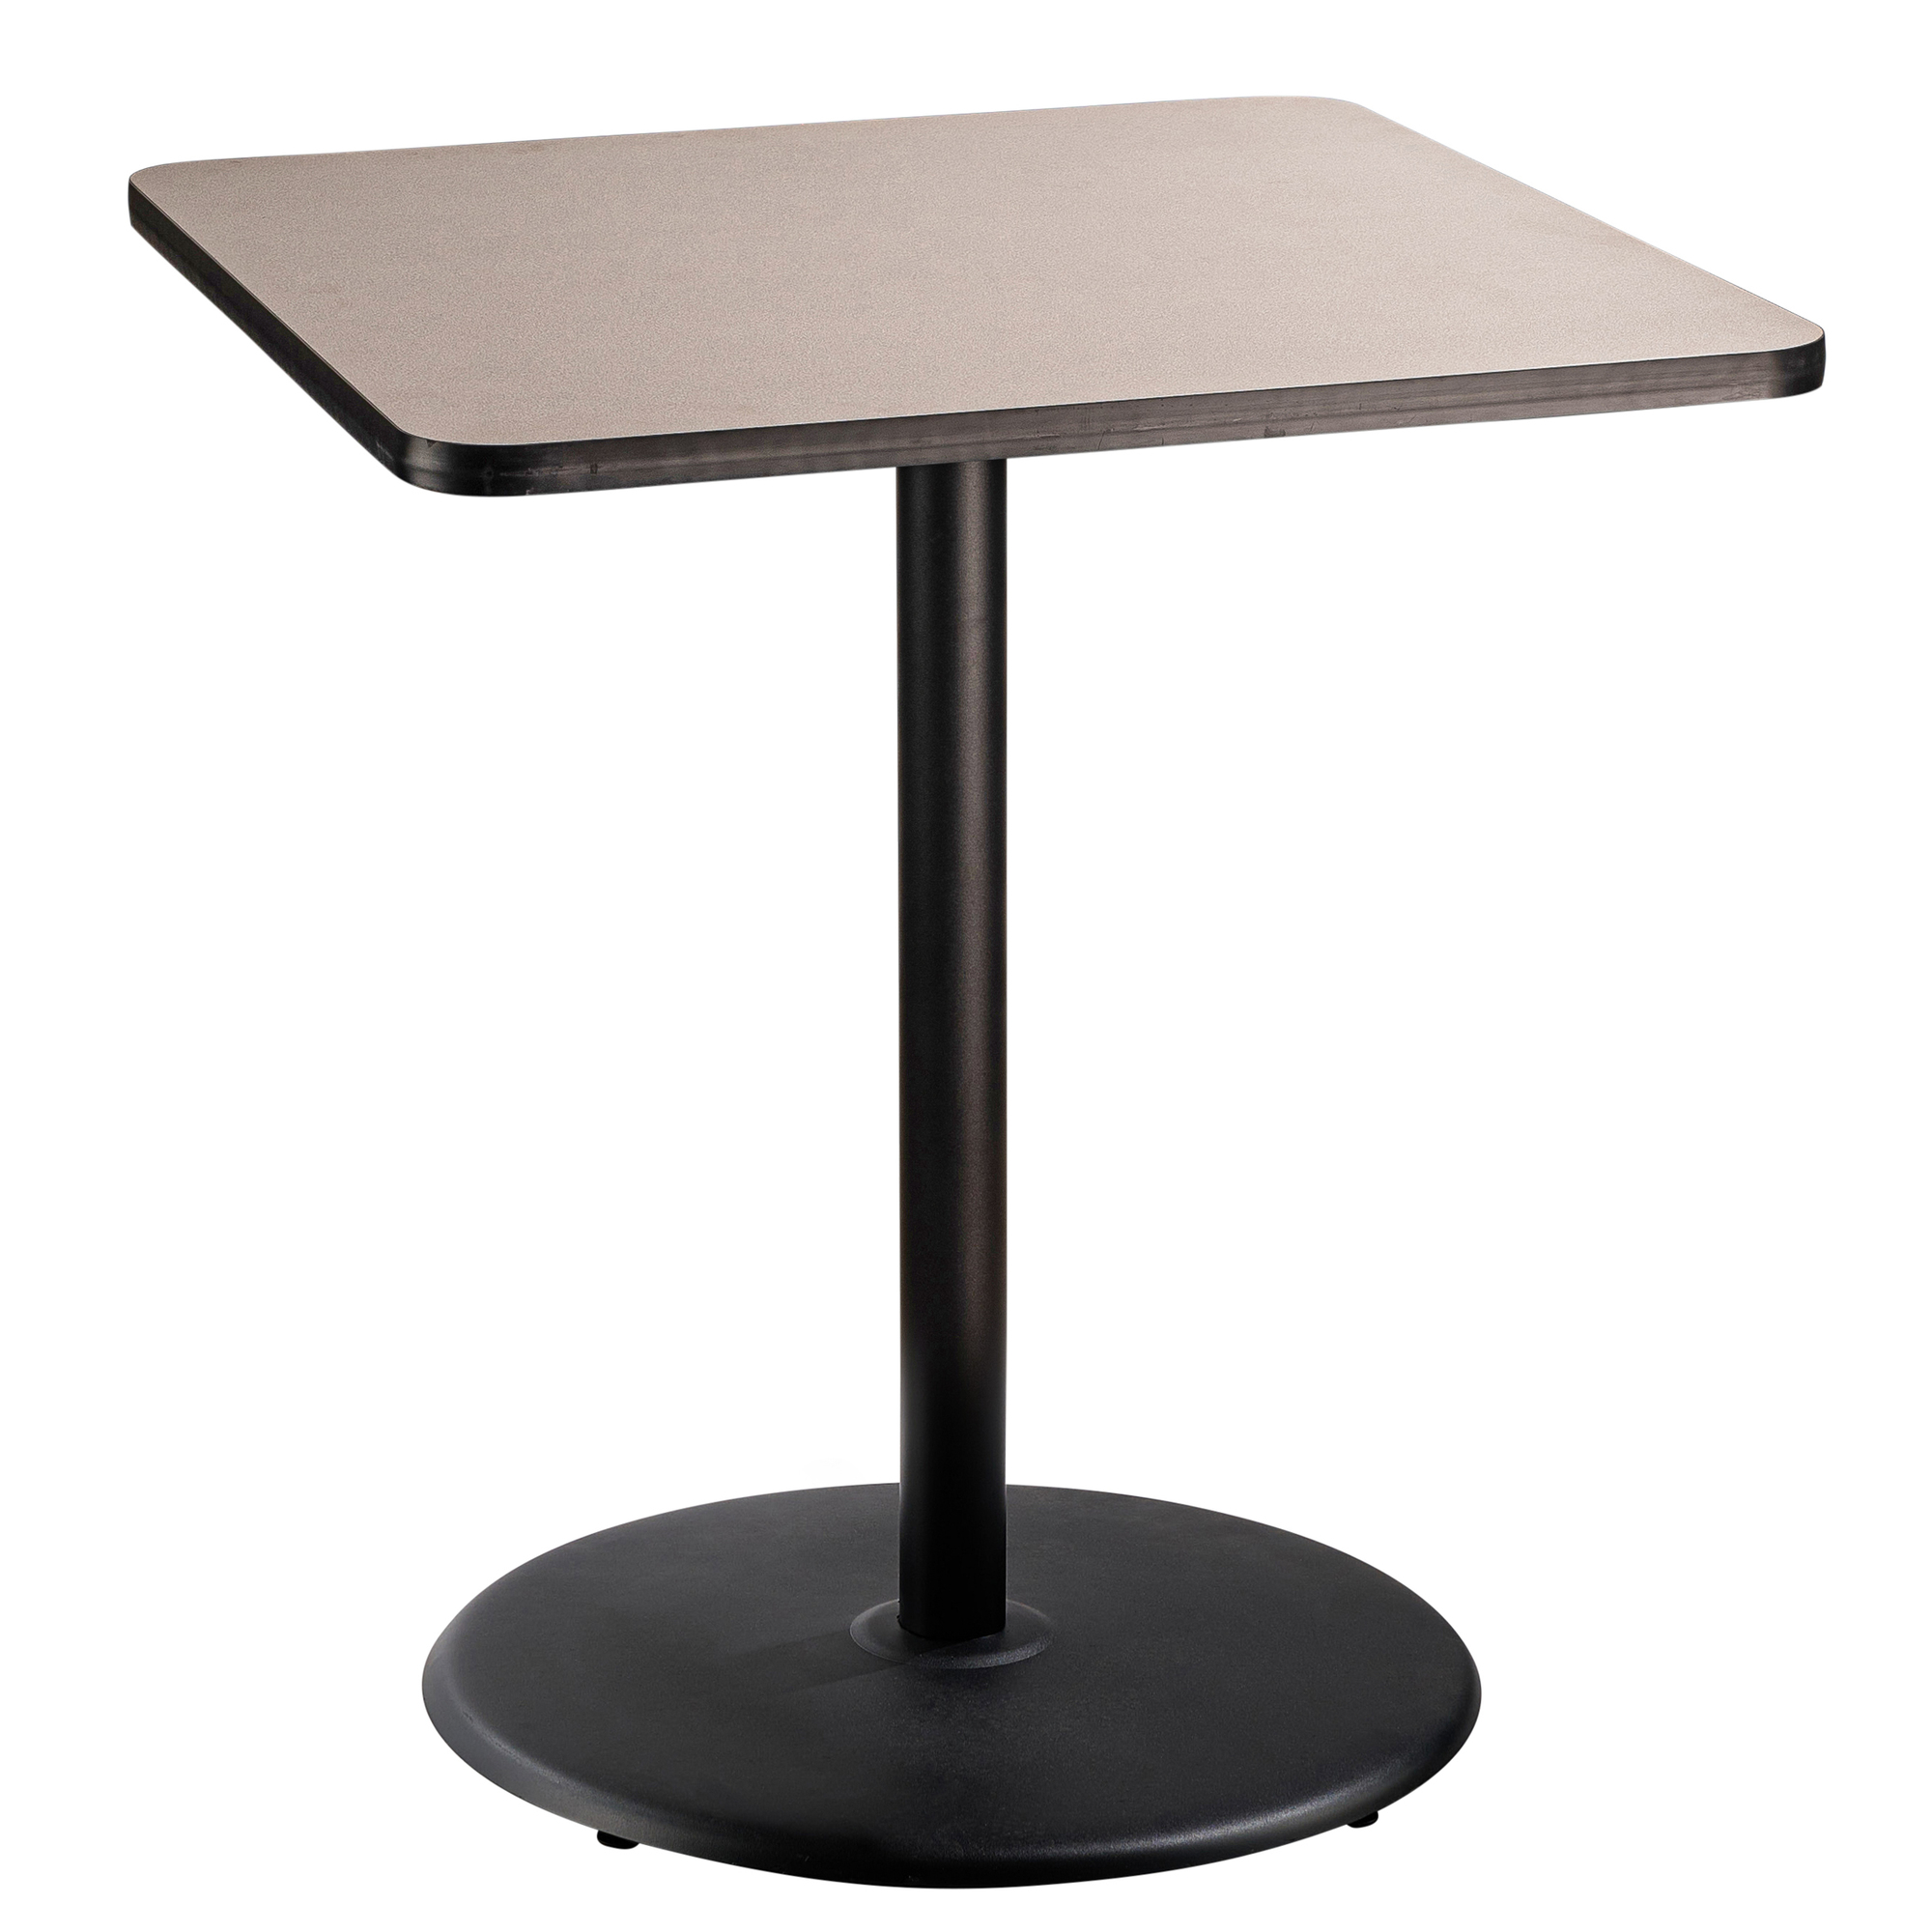 "National Public Seating, Cafe Table, 36x36x42Square ""R"" Base, Height 42 in, Model CT33636RBPBTMGY"